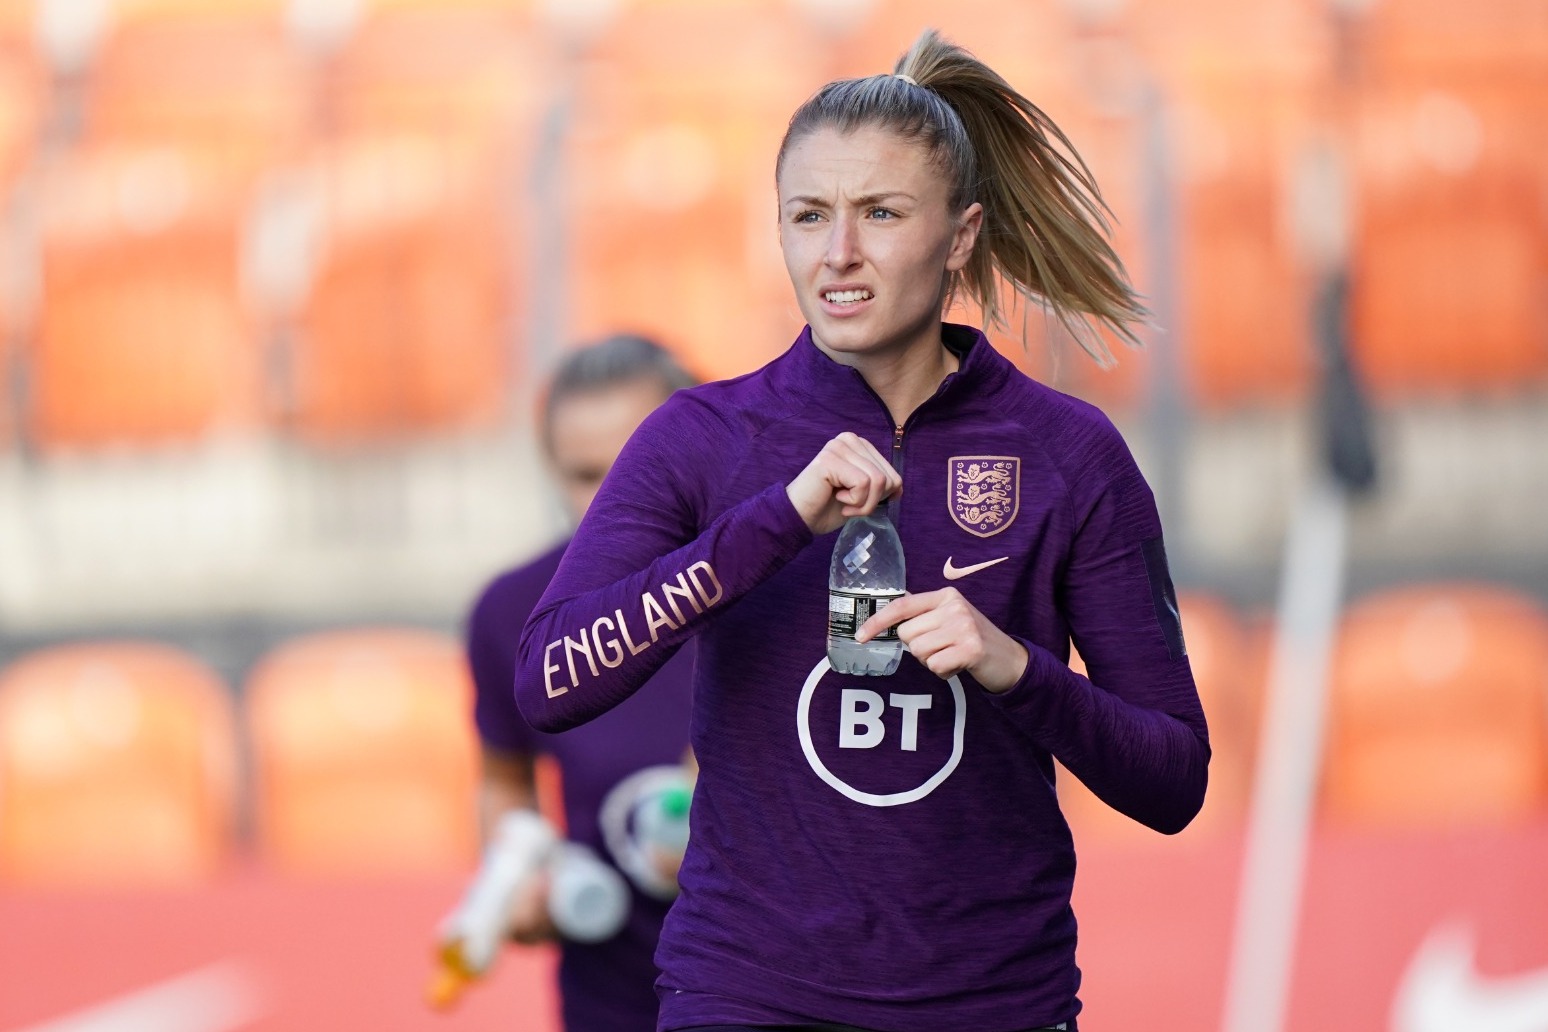 England Women appoint Arsenal’s Leah Williamson as captain for Euro 2022 